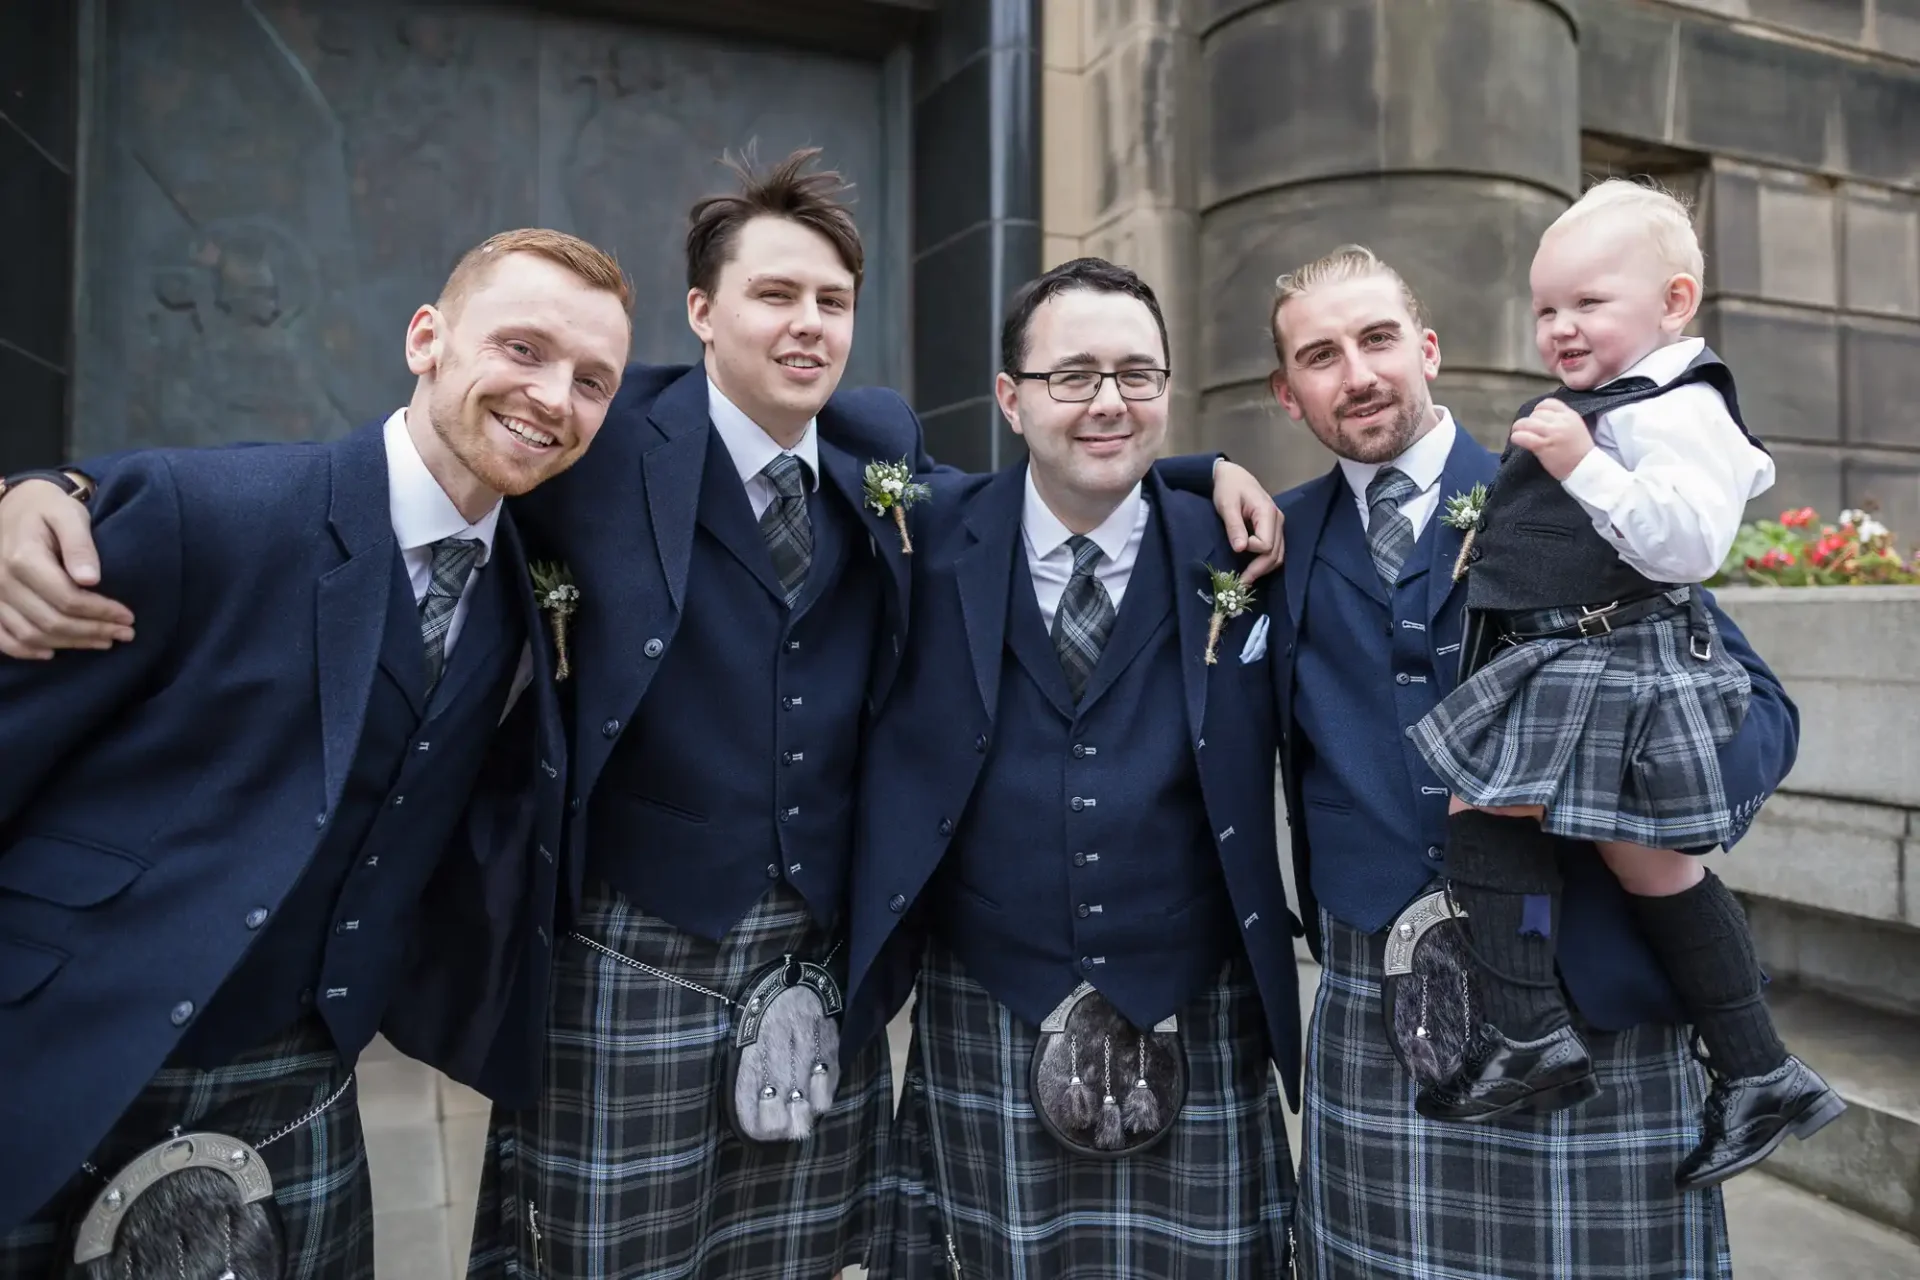 Four men and a young boy in traditional scottish kilts smiling together at a formal event.